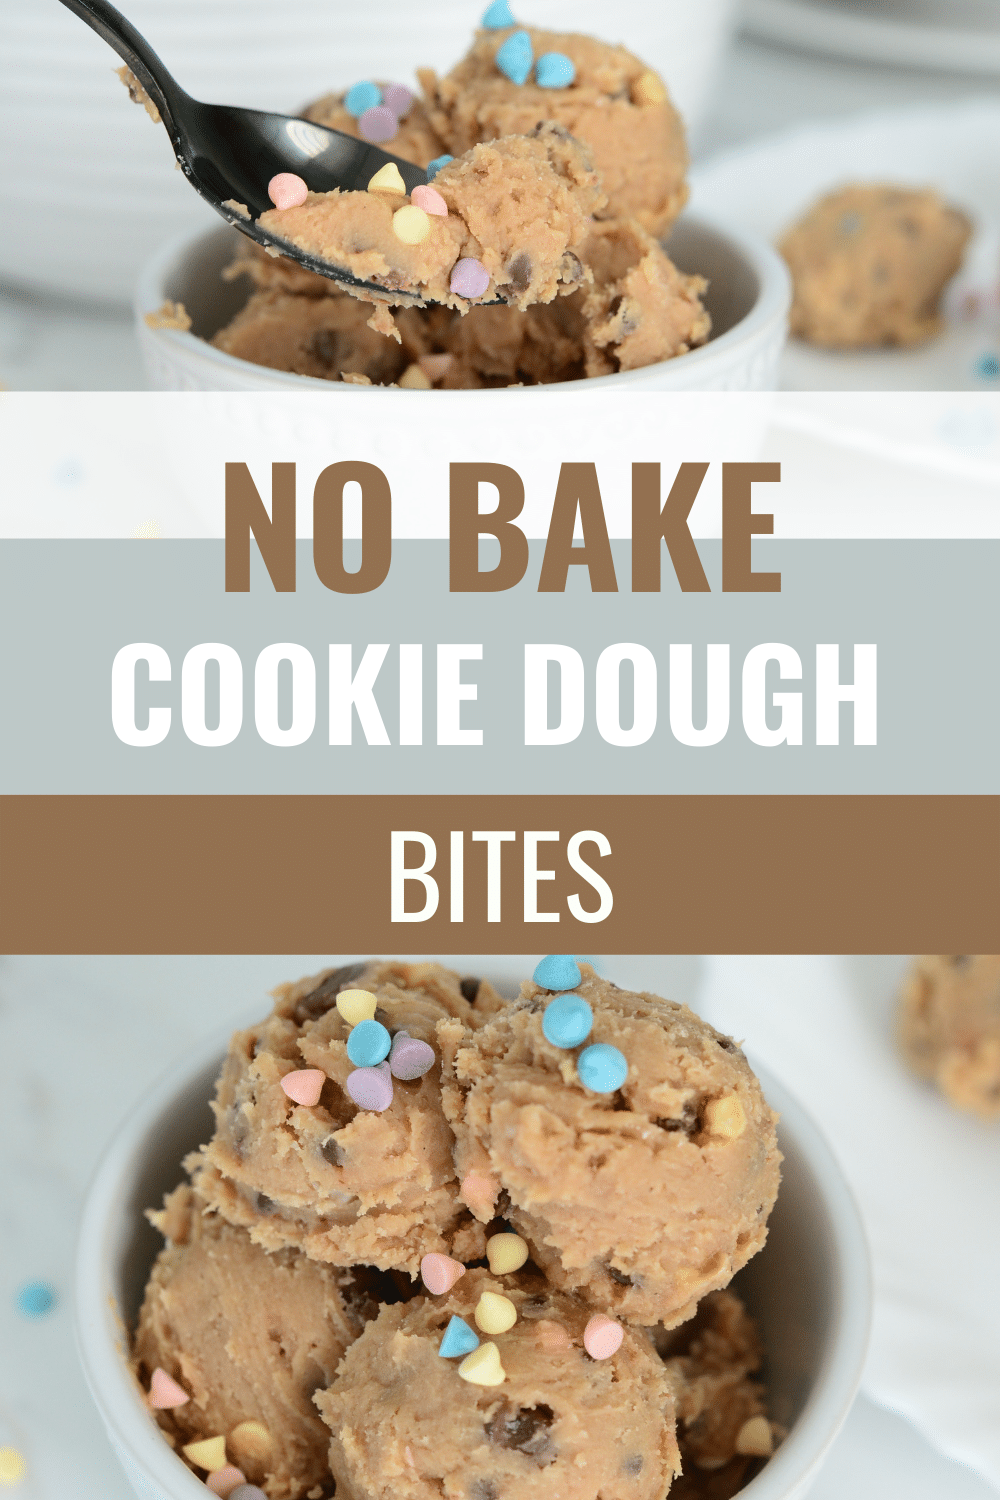 If you love cookie dough, then you’re going to love these No Bake Cookie Dough Bites! They’re perfect when you’re craving something sweet. #cookiedoughbites #nobake #cookiedough via @wondermomwannab